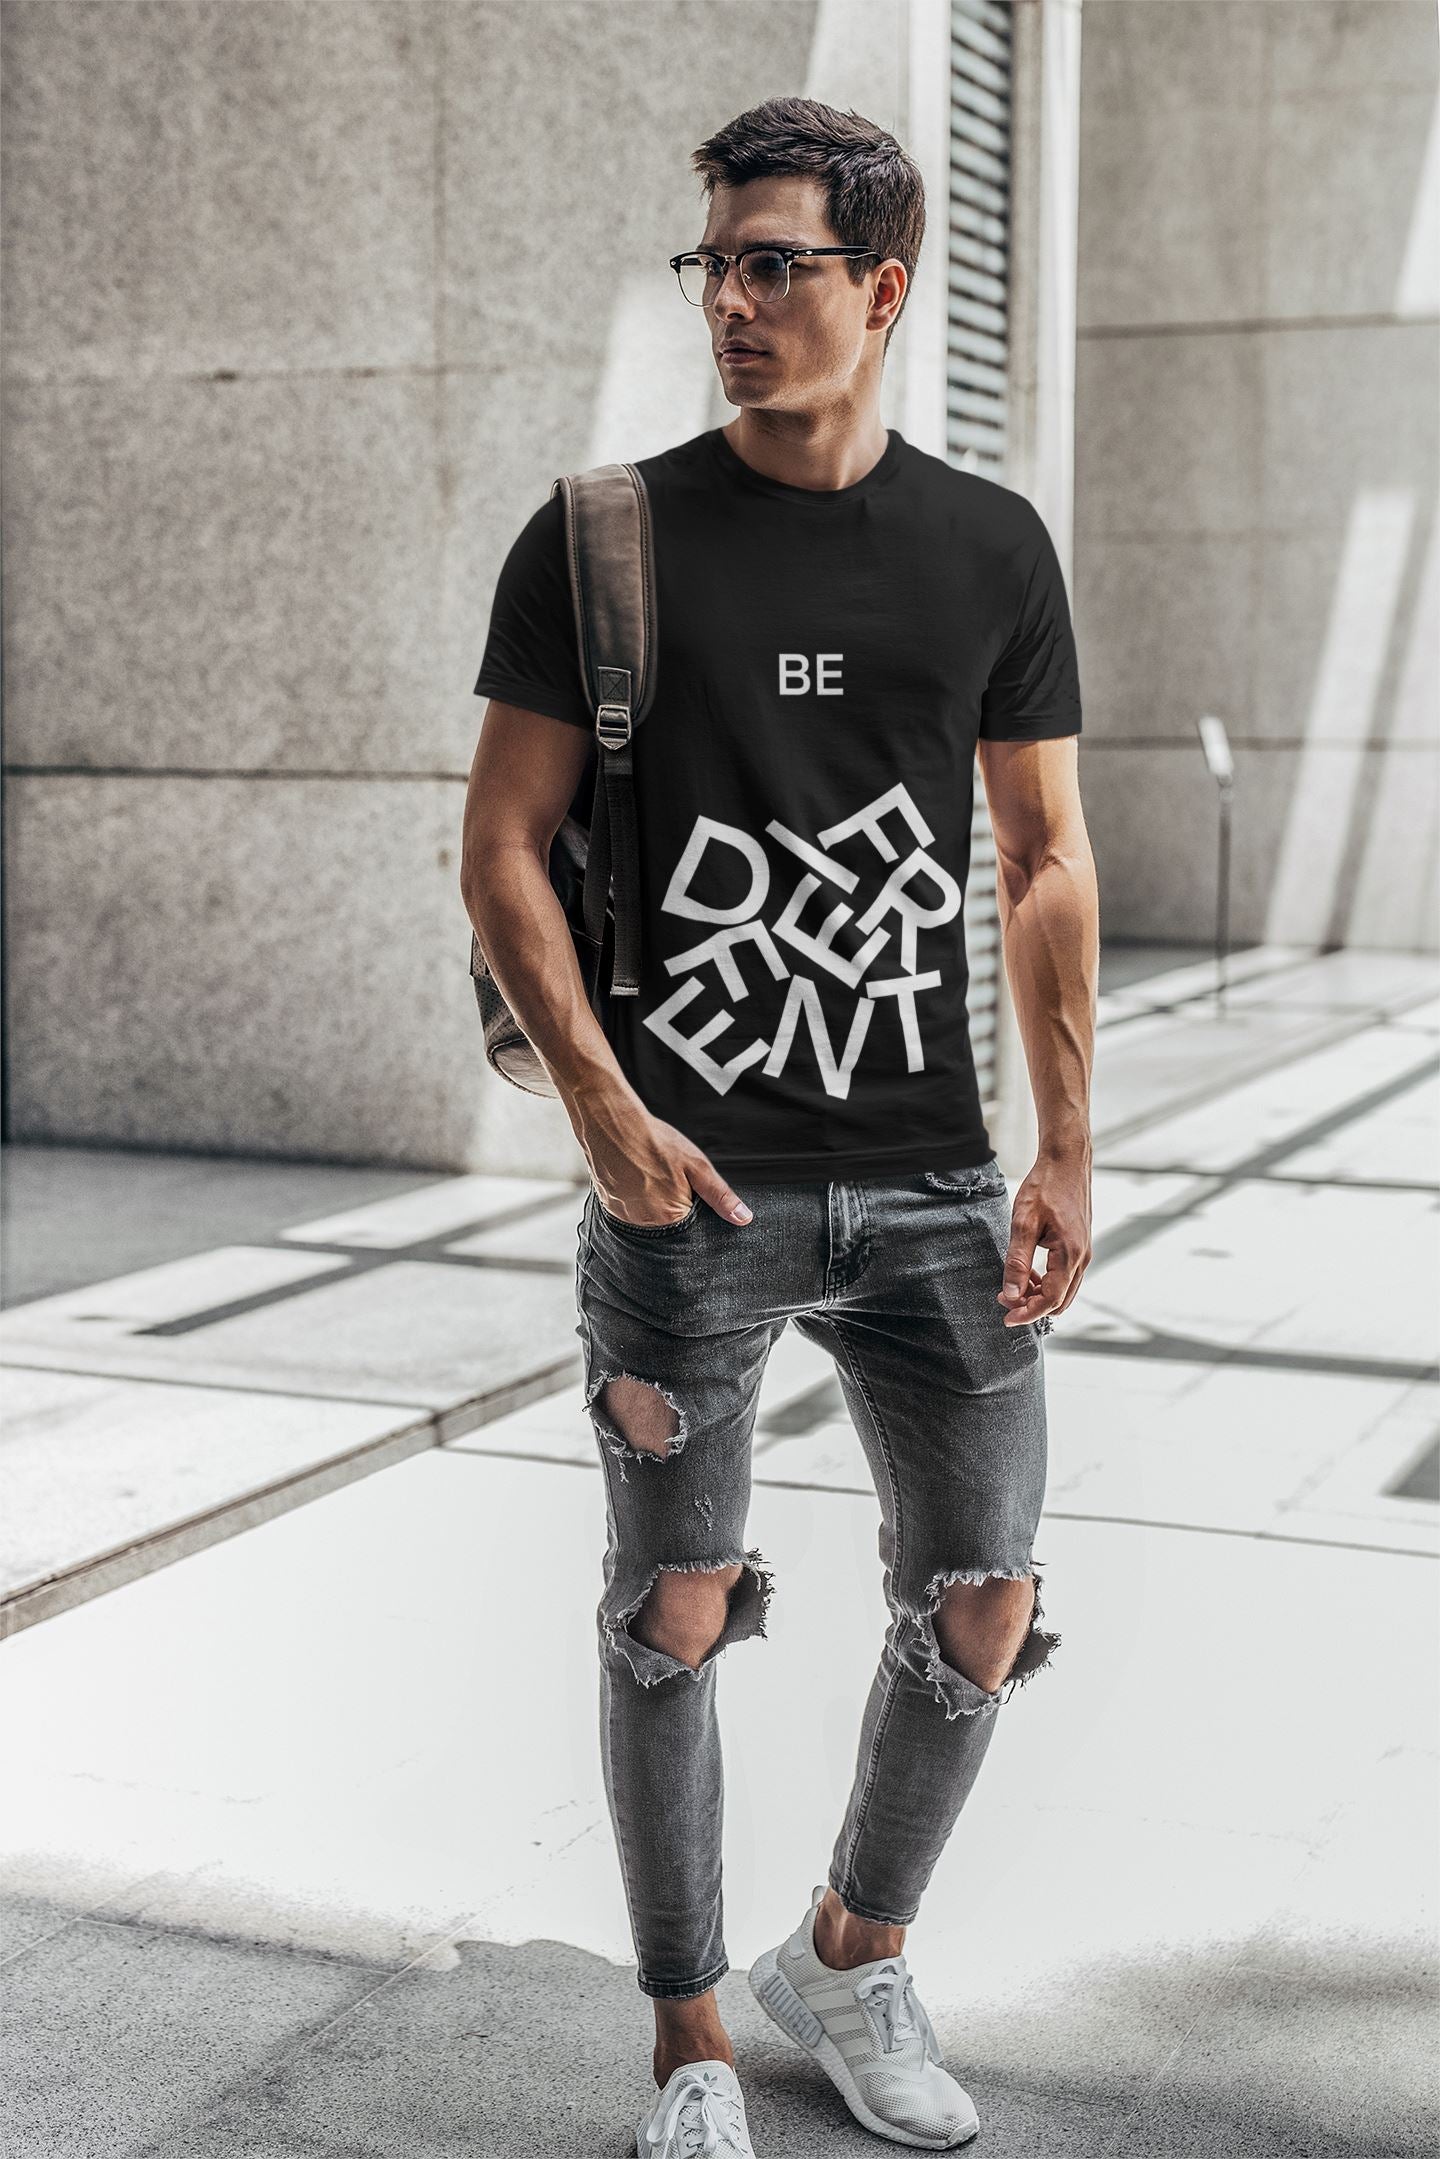 Be Different Black and White Tumbled Letters T-Shirt*